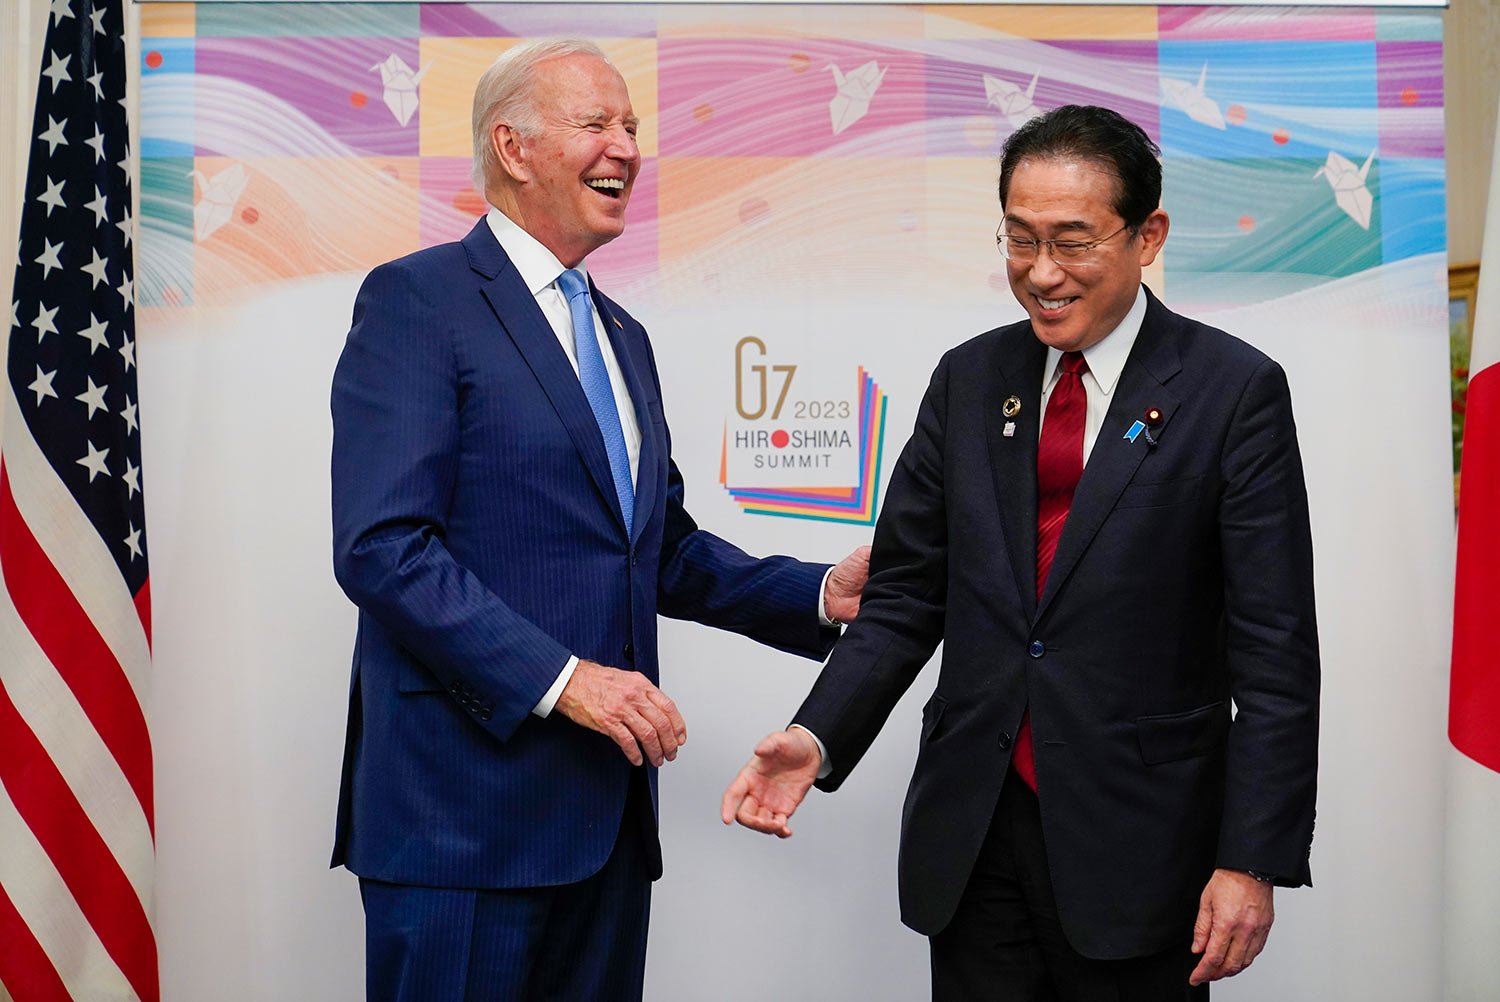  President Joe Biden, left, reacts as he meets with Japan's Prime Minister Fumio Kishida in Hiroshima, Japan, Thursday, May 18, 2023, ahead of the start of the G-7 Summit. (AP Photo/Susan Walsh) 